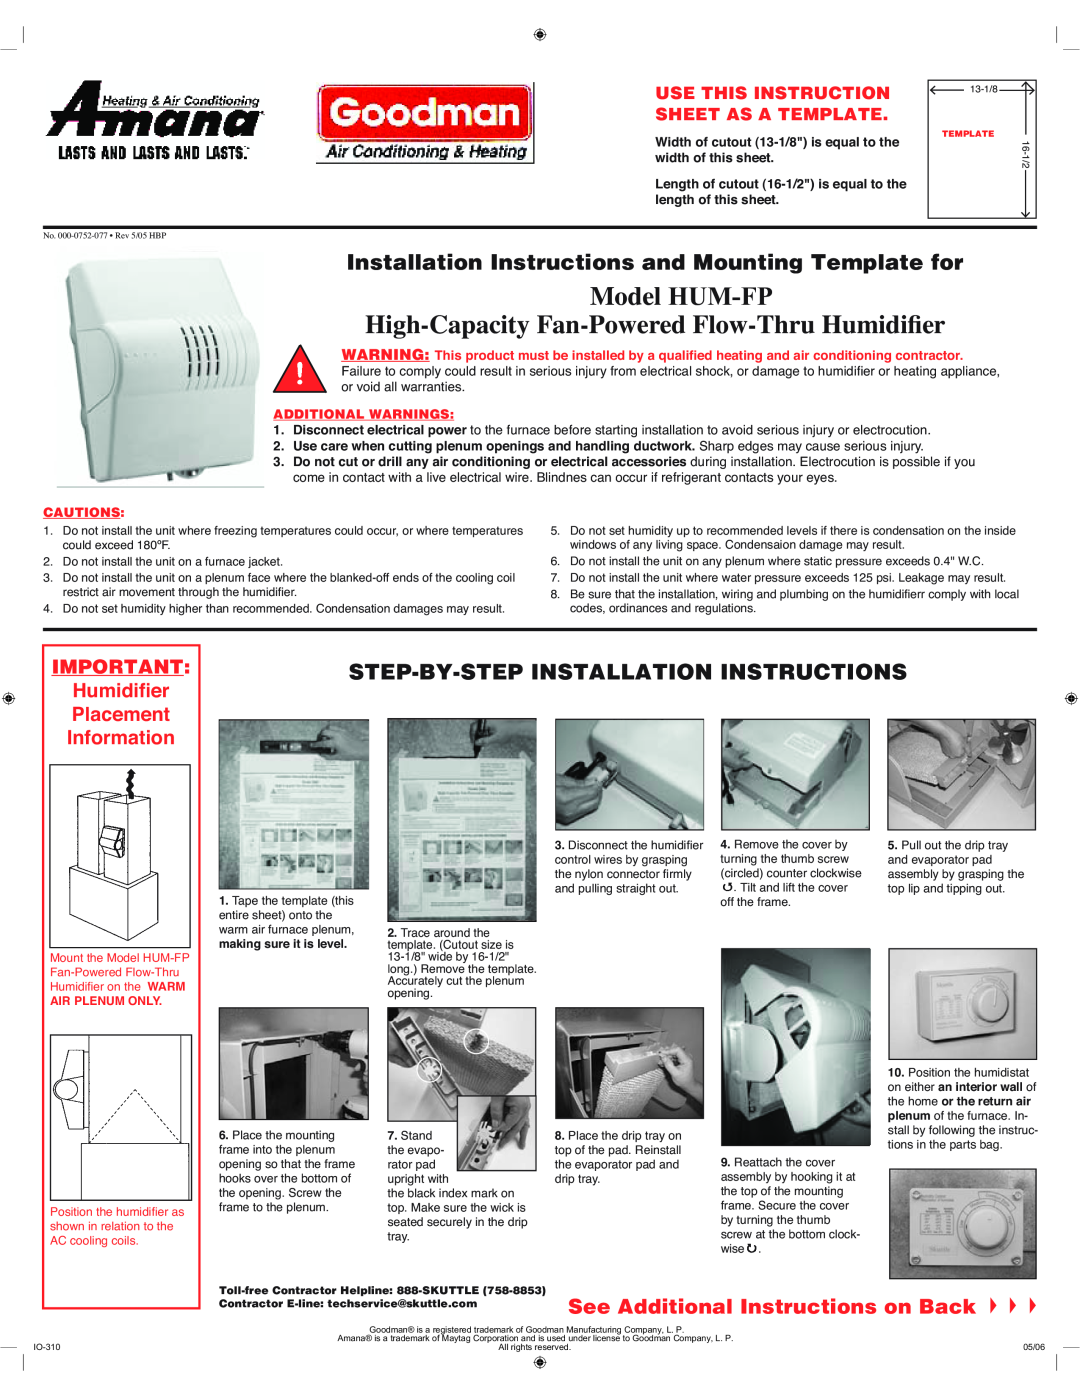 Goodman Mfg HUM-FP installation instructions Width of cutout 13-1/8is equal to the, width of this sheet, Cautions 